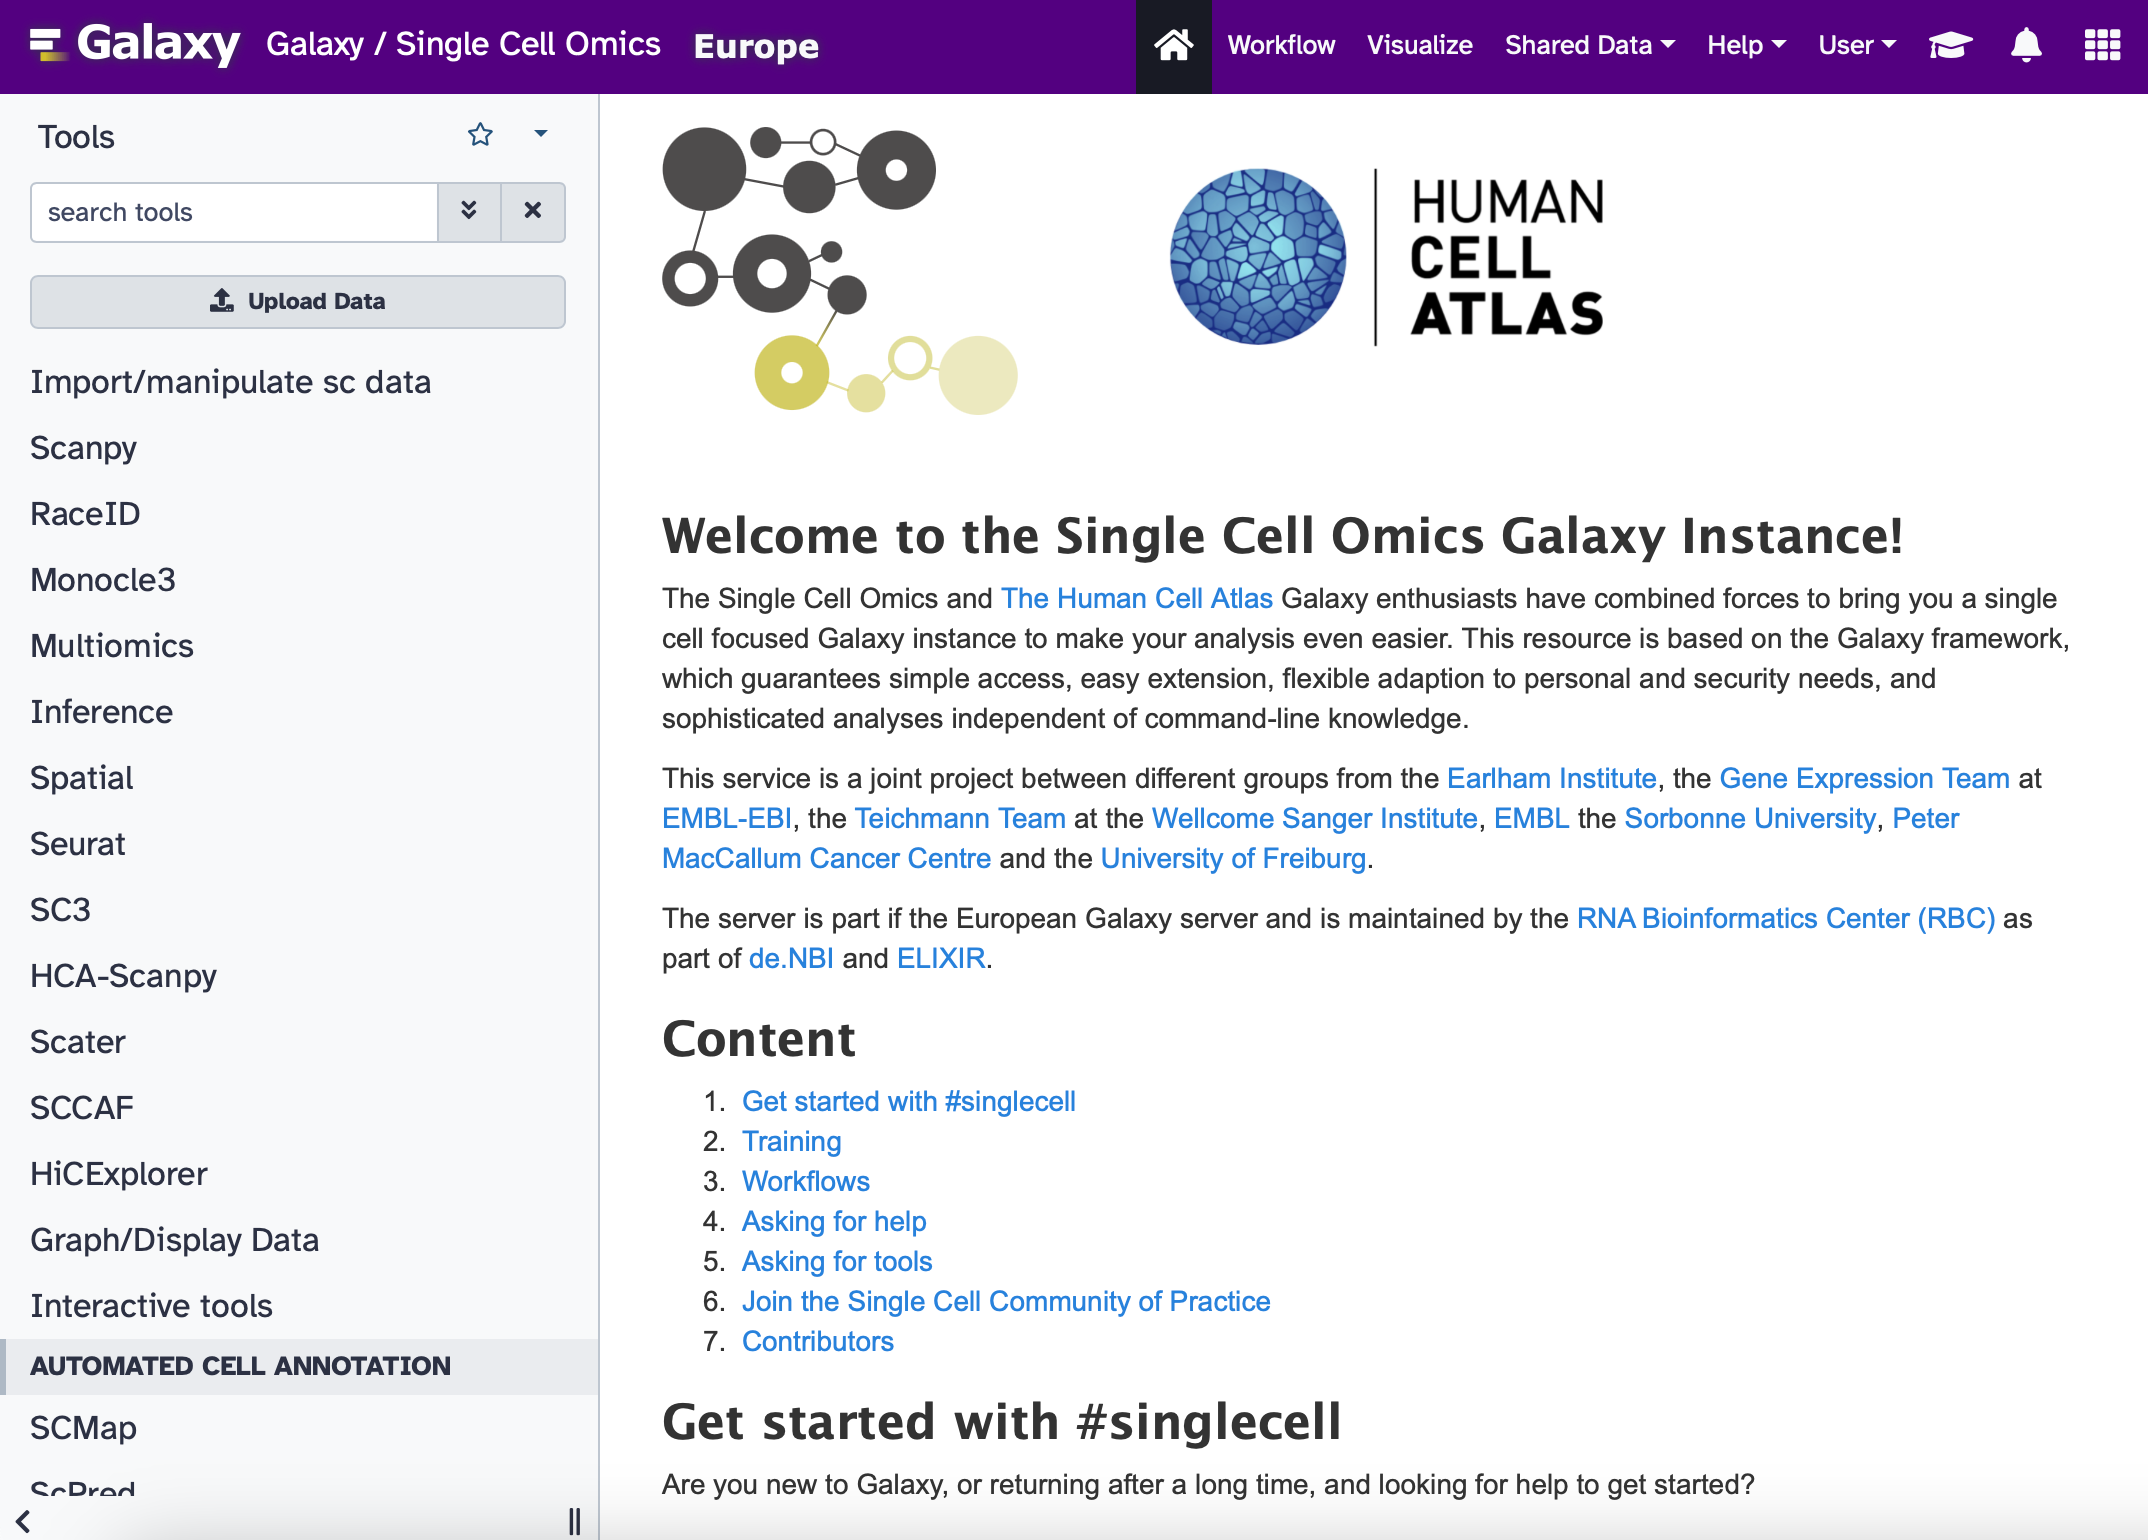 screenshot of the Single Cell Omics subdomain page, with purple mastheader, Single Cell Tools categories along the side, and an updated logo combining the Single Cell Omics connected cells image with the Human Cell Atlas blue embyro logo